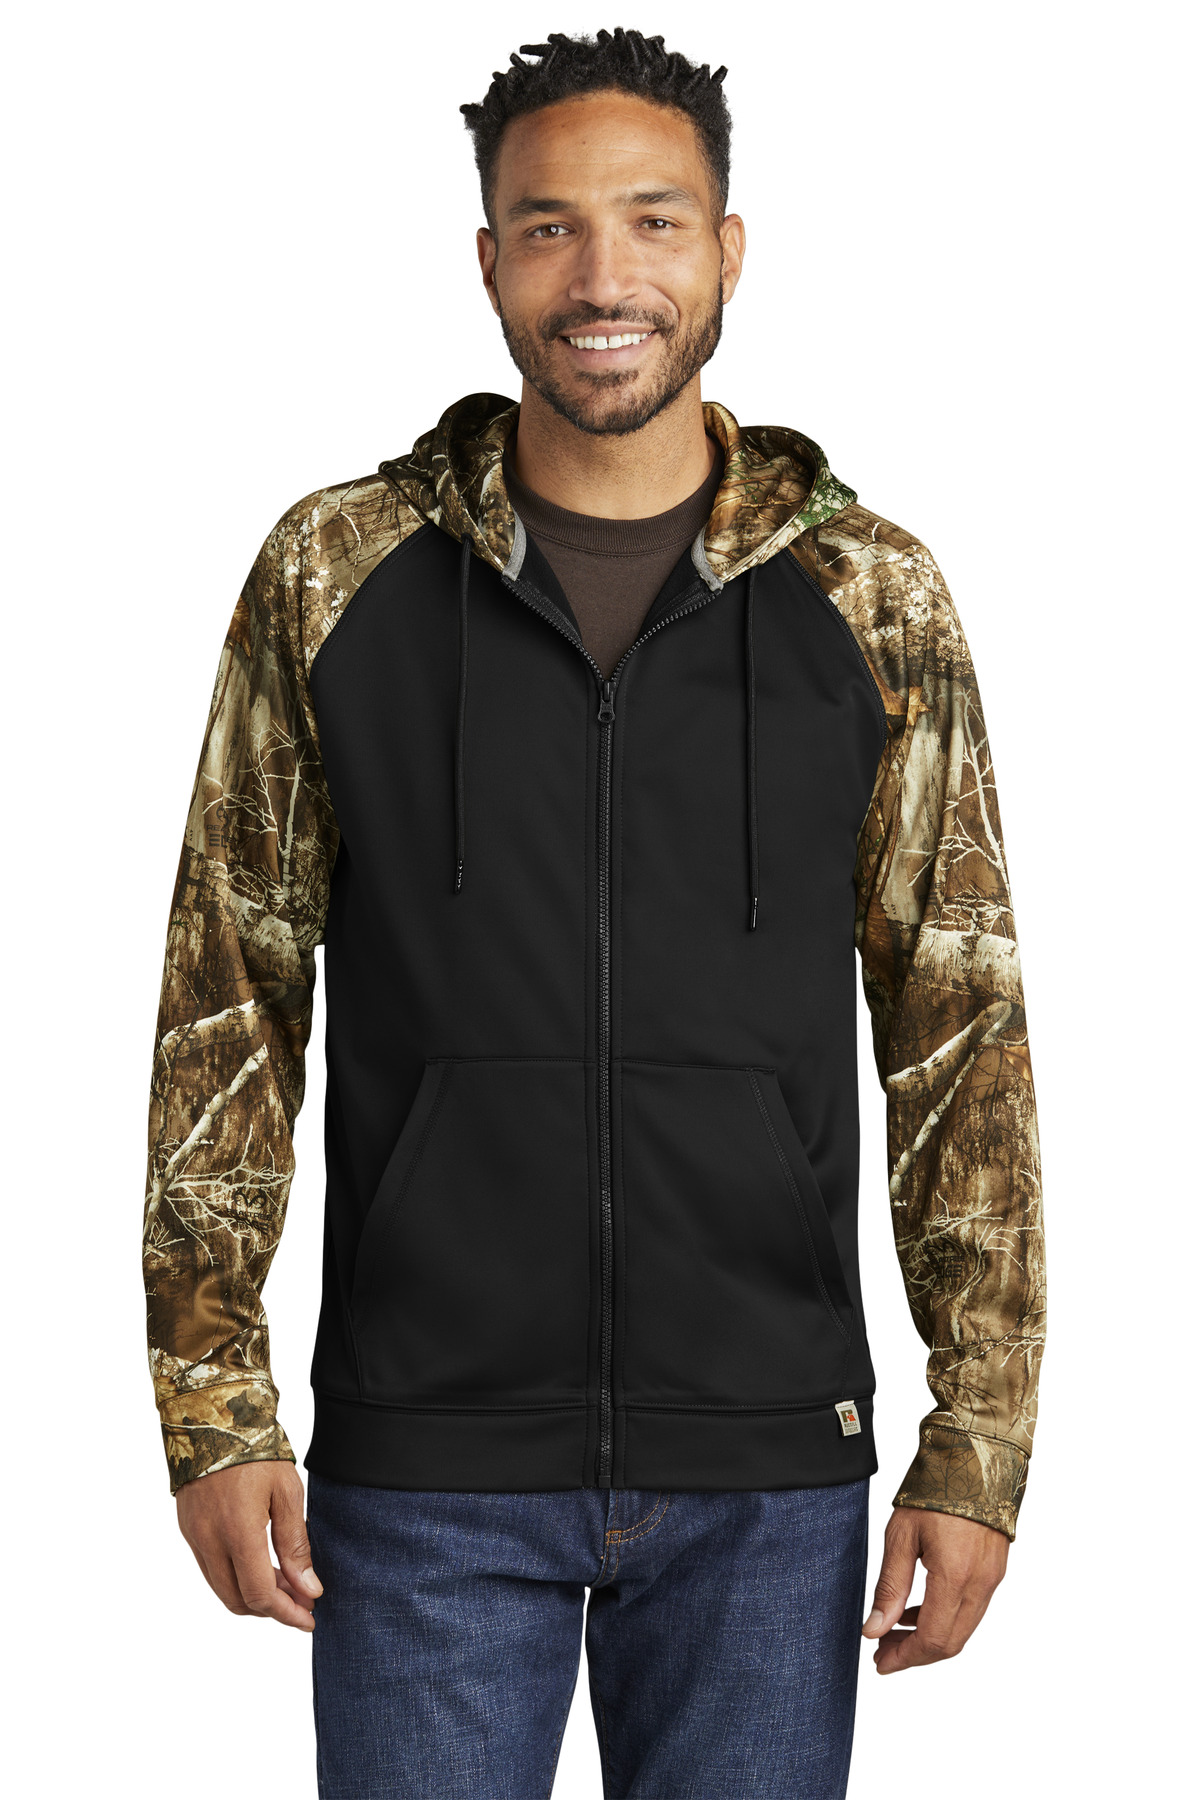 Russell Outdoors Realtree Performance Colorblock Full-Zip Hoodie-Russell Outdoors